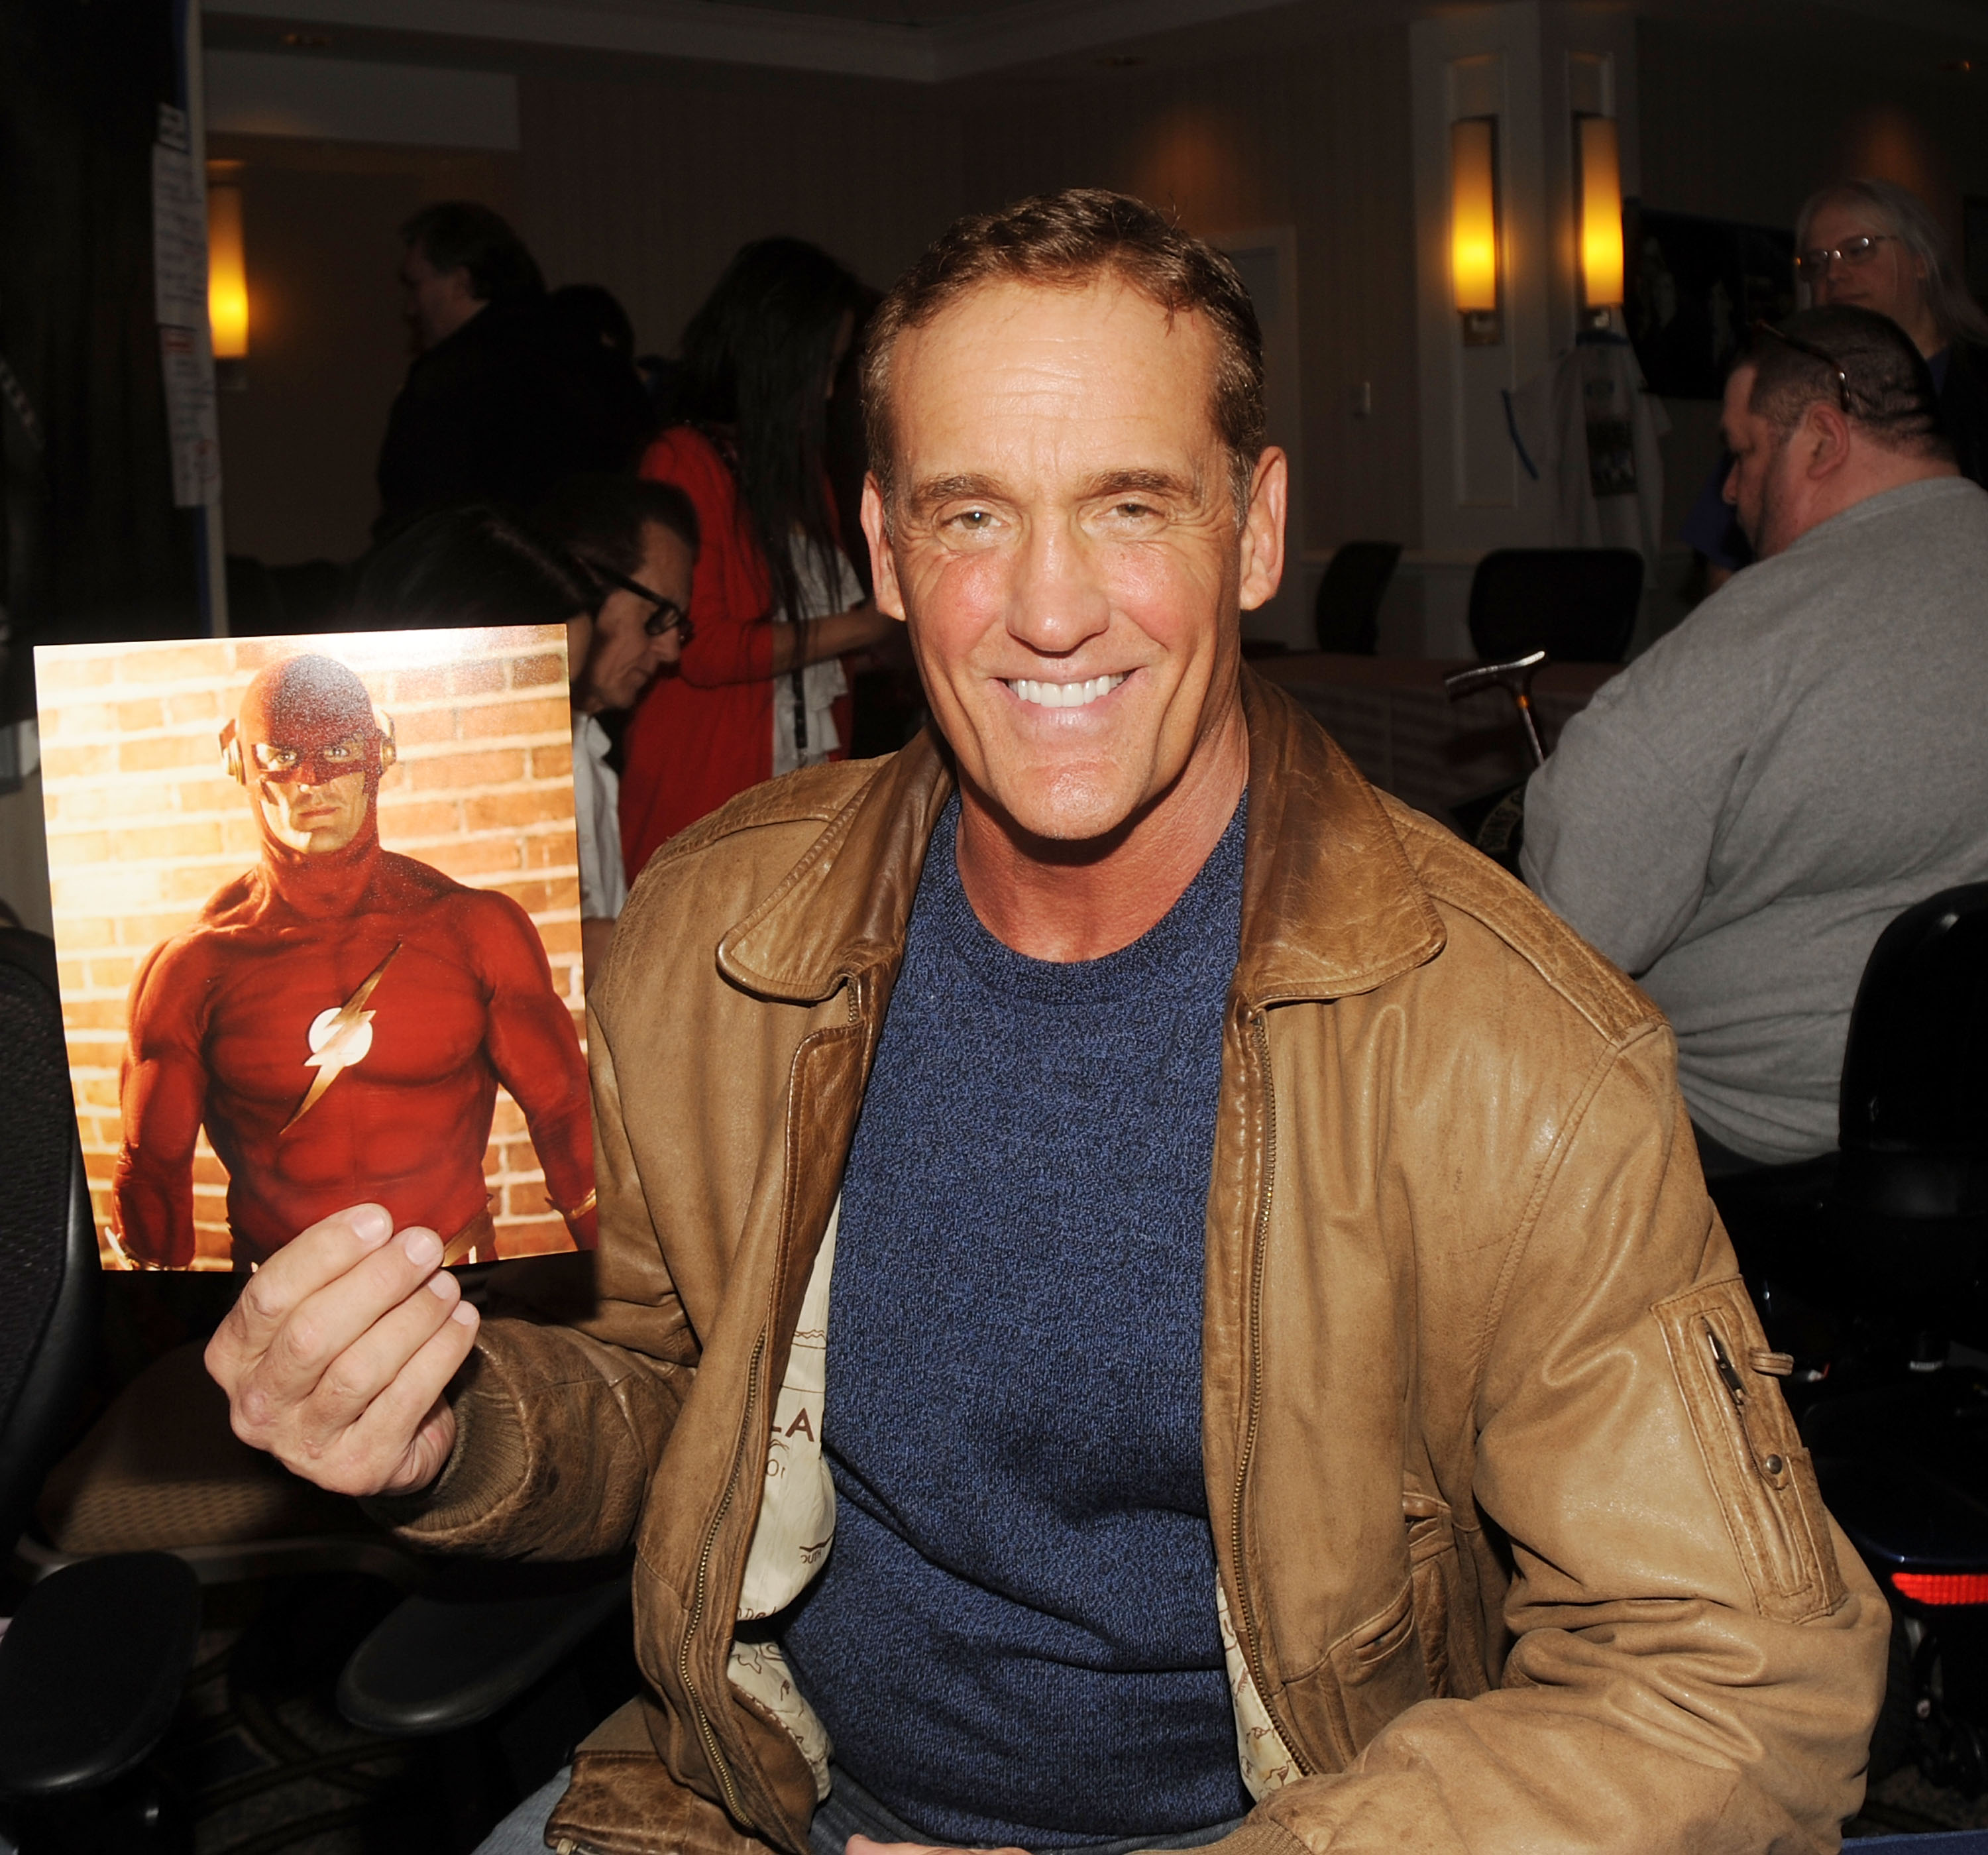 'Stargirl' actor John Wesley Shipp, who plays Jay Garrick, wears a brown jacket over a blue shirt and holds up a picture of him in character as The Flash.